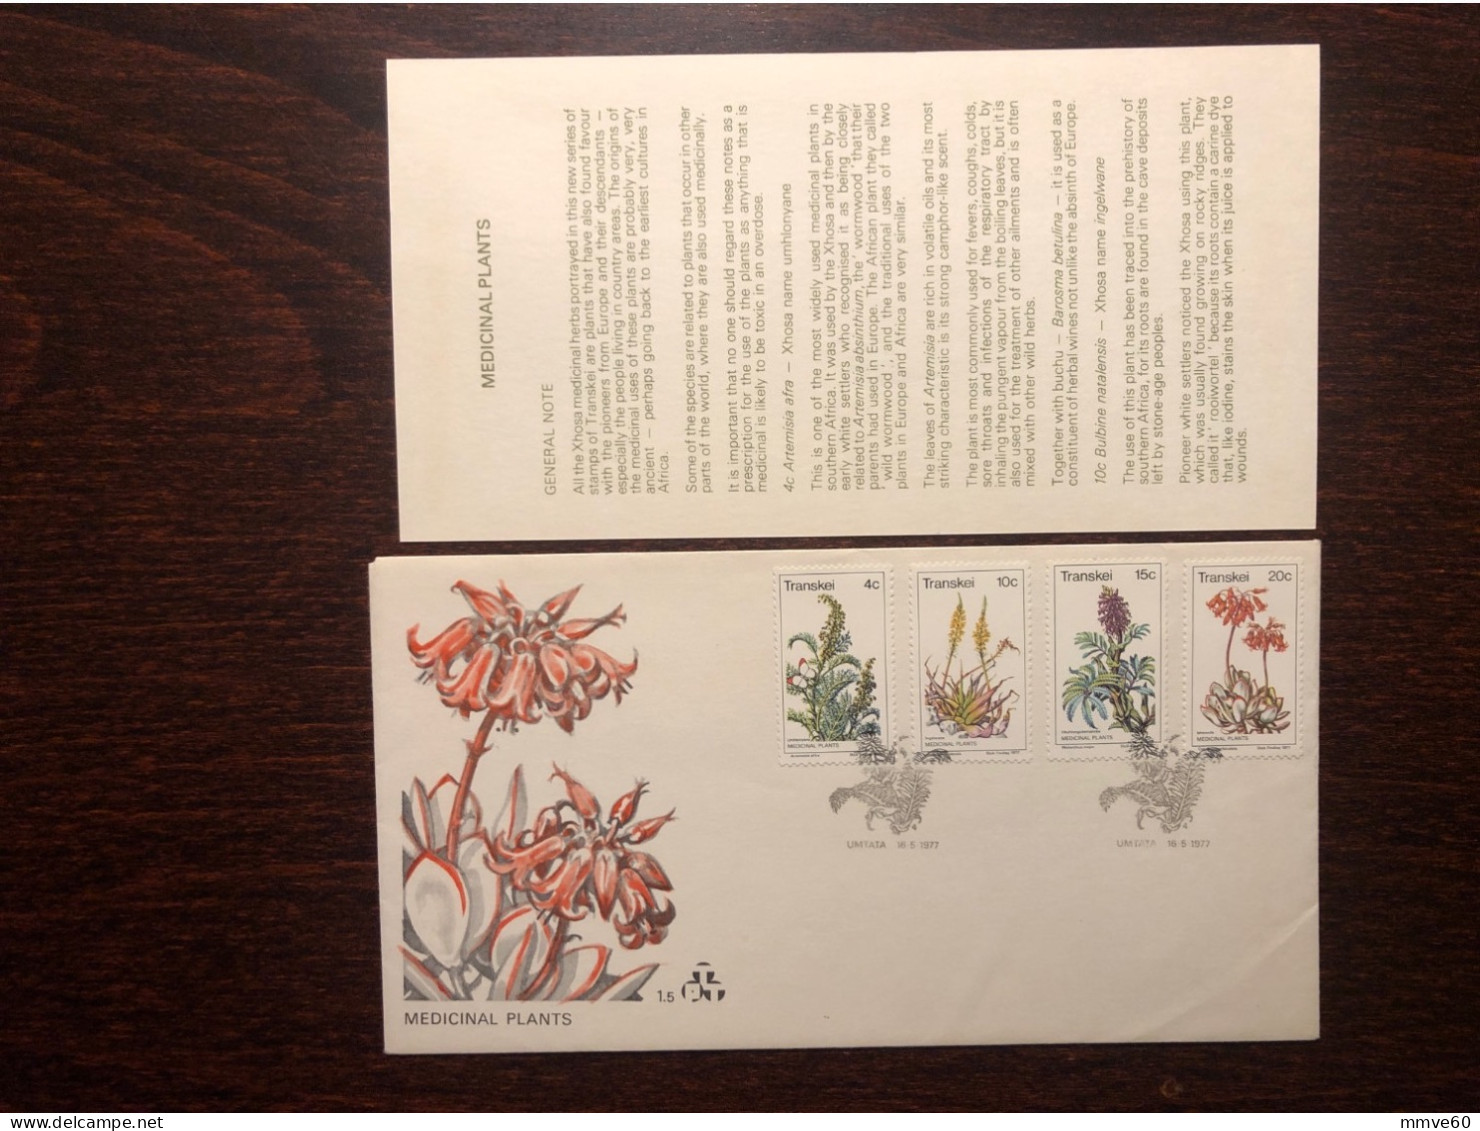 TRANSKEI FDC COVER 1977 YEAR MEDICINAL PLANTS HERBS HEALTH MEDICINE STAMPS - Transkei